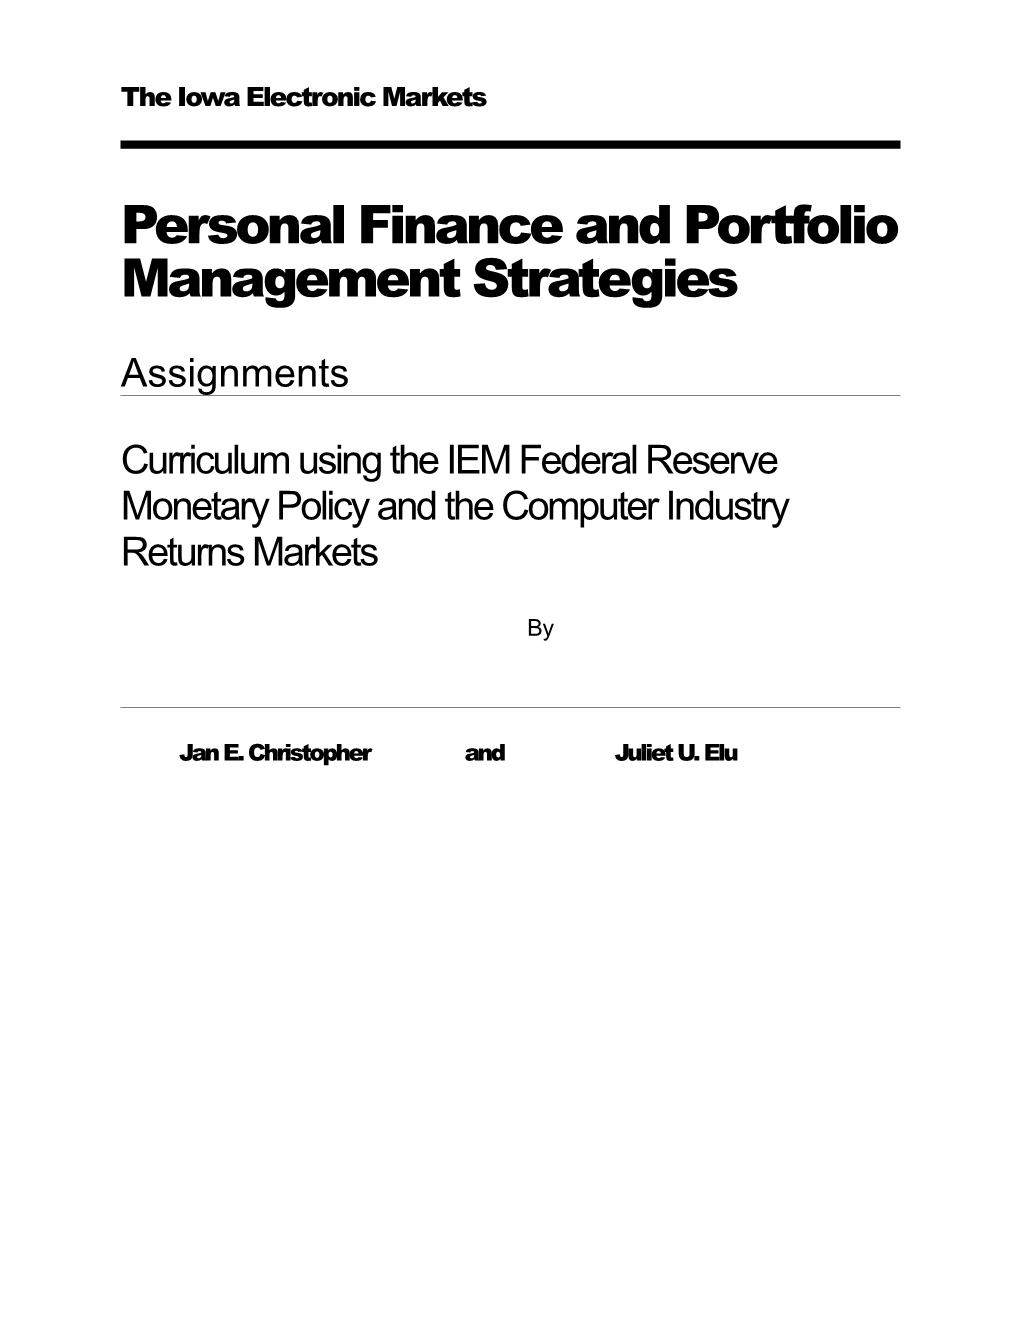 Personal Finance and Portfolio Management Strategies Module Assignment